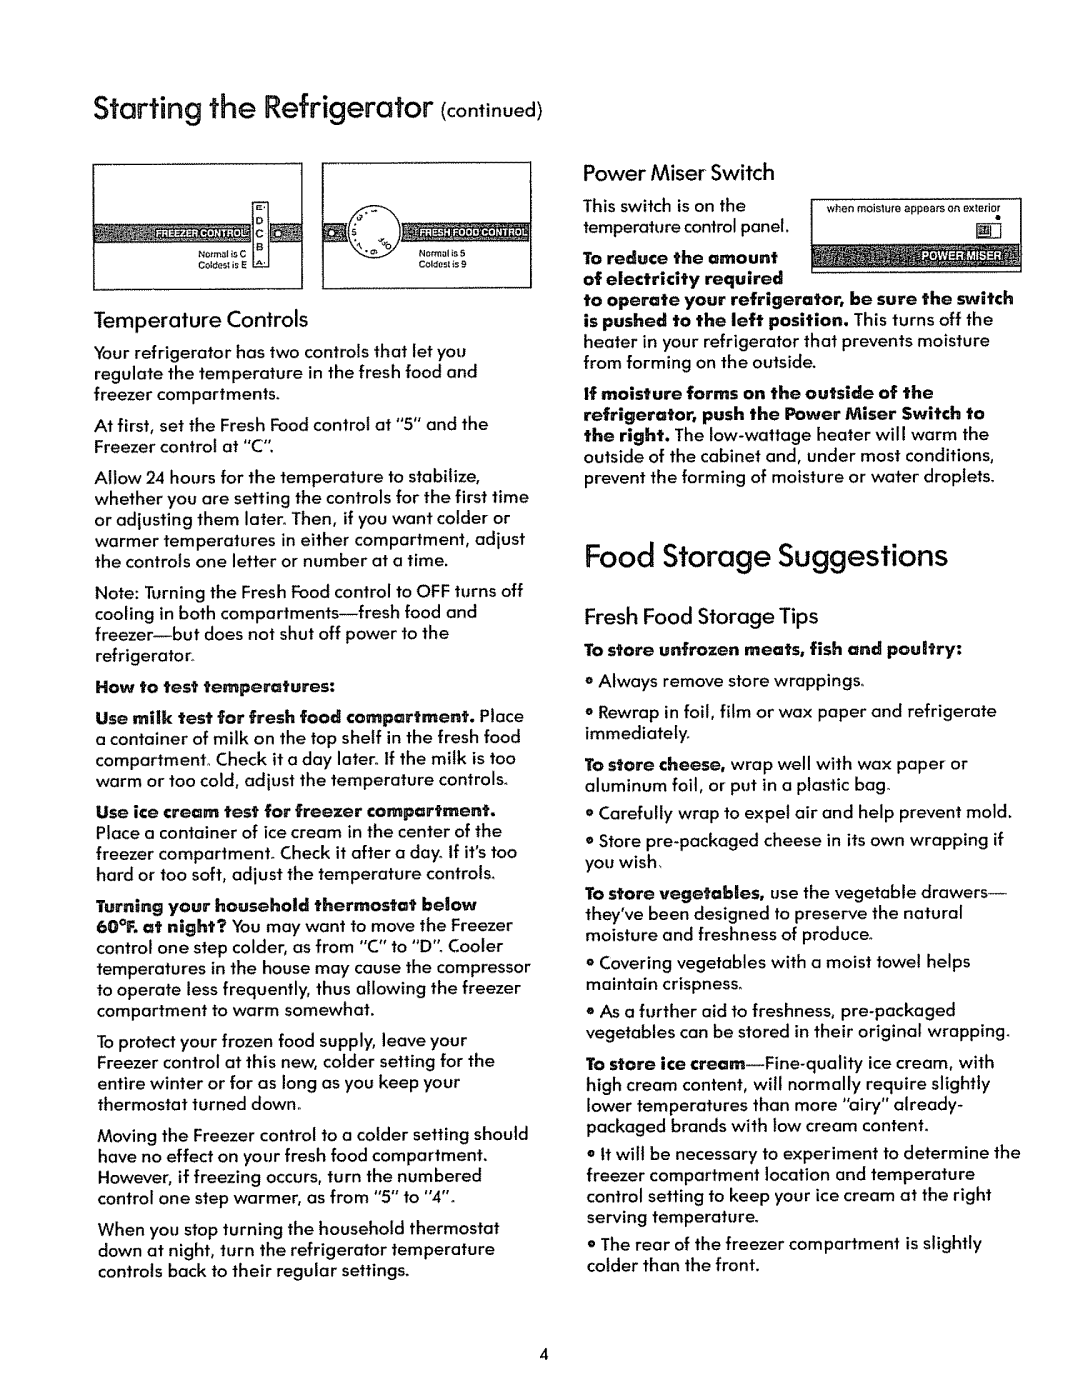 Sears 71281, 71579 Starting the Refrigerator continued, Food Storage Suggestions, Temperature Controls, Power Miser Switch 